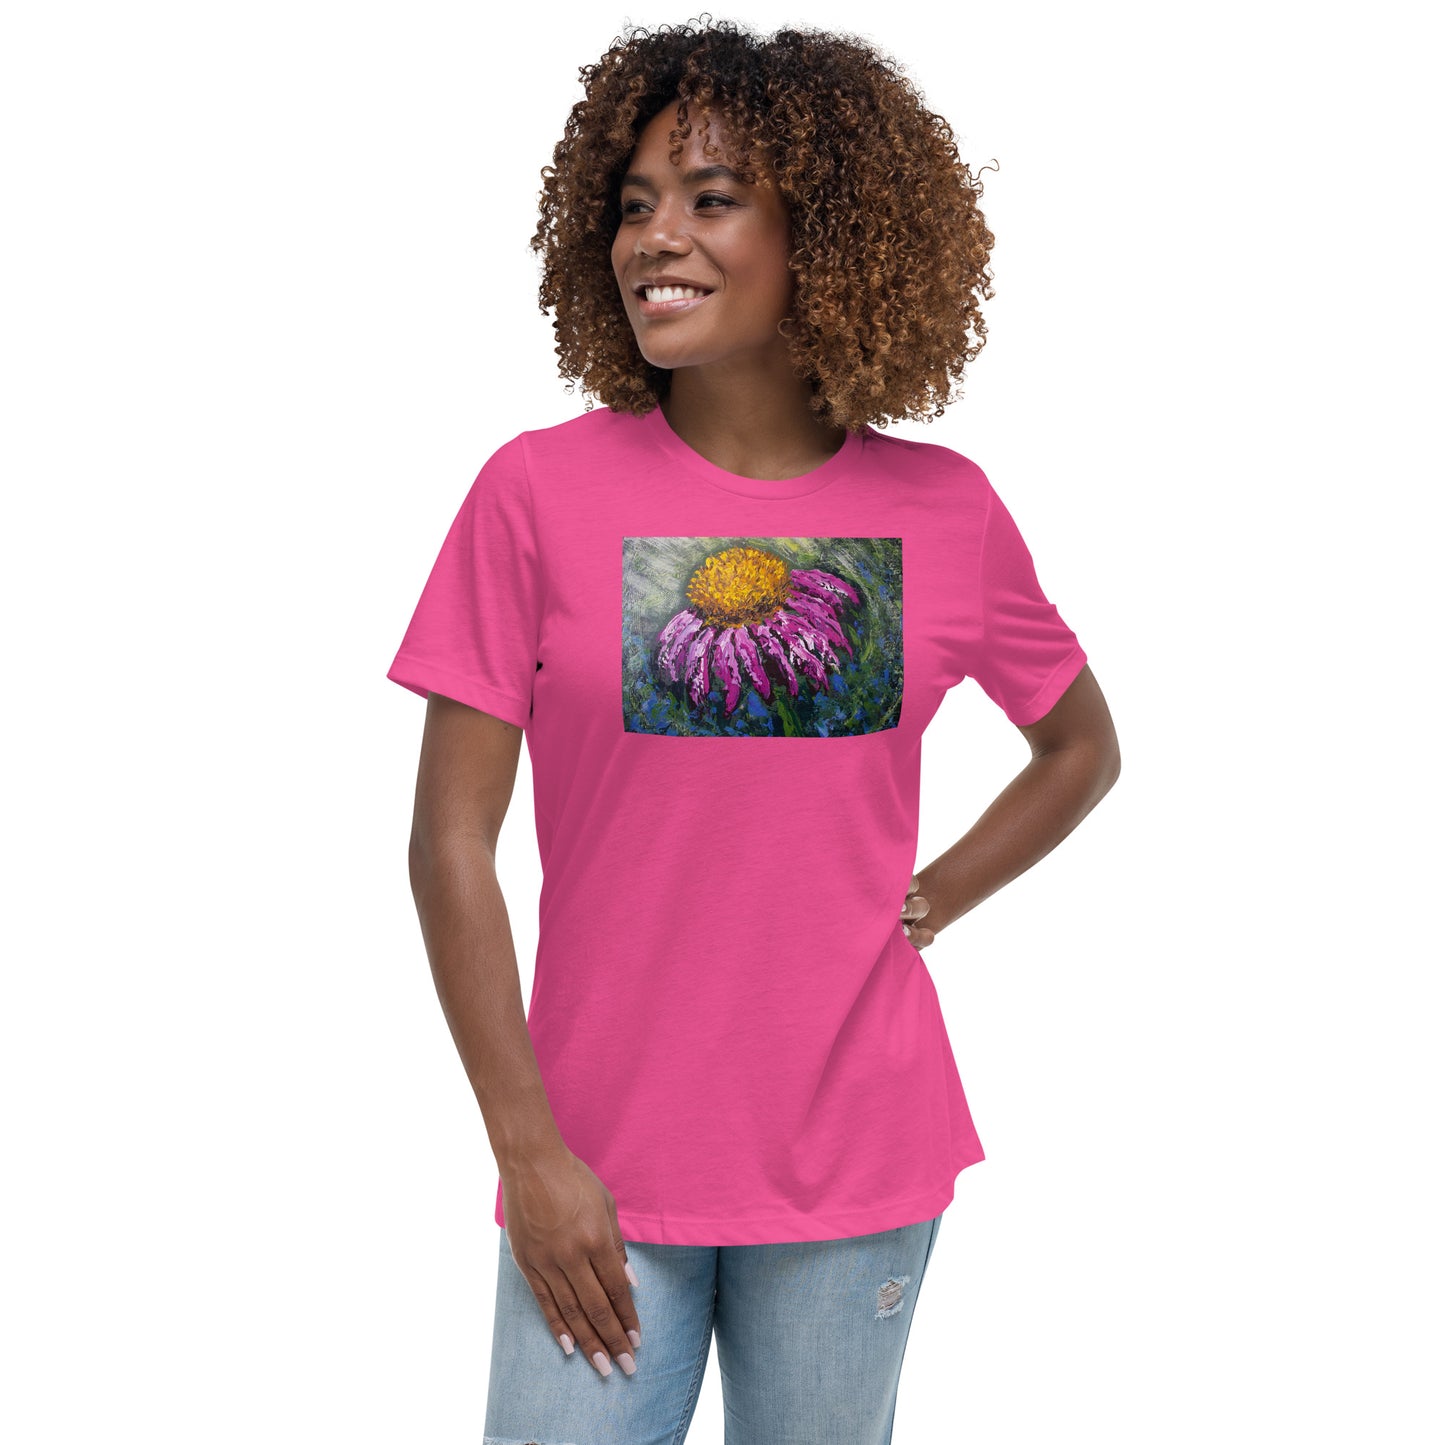 Women's Relaxed T-Shirt "Courage for the Journey"